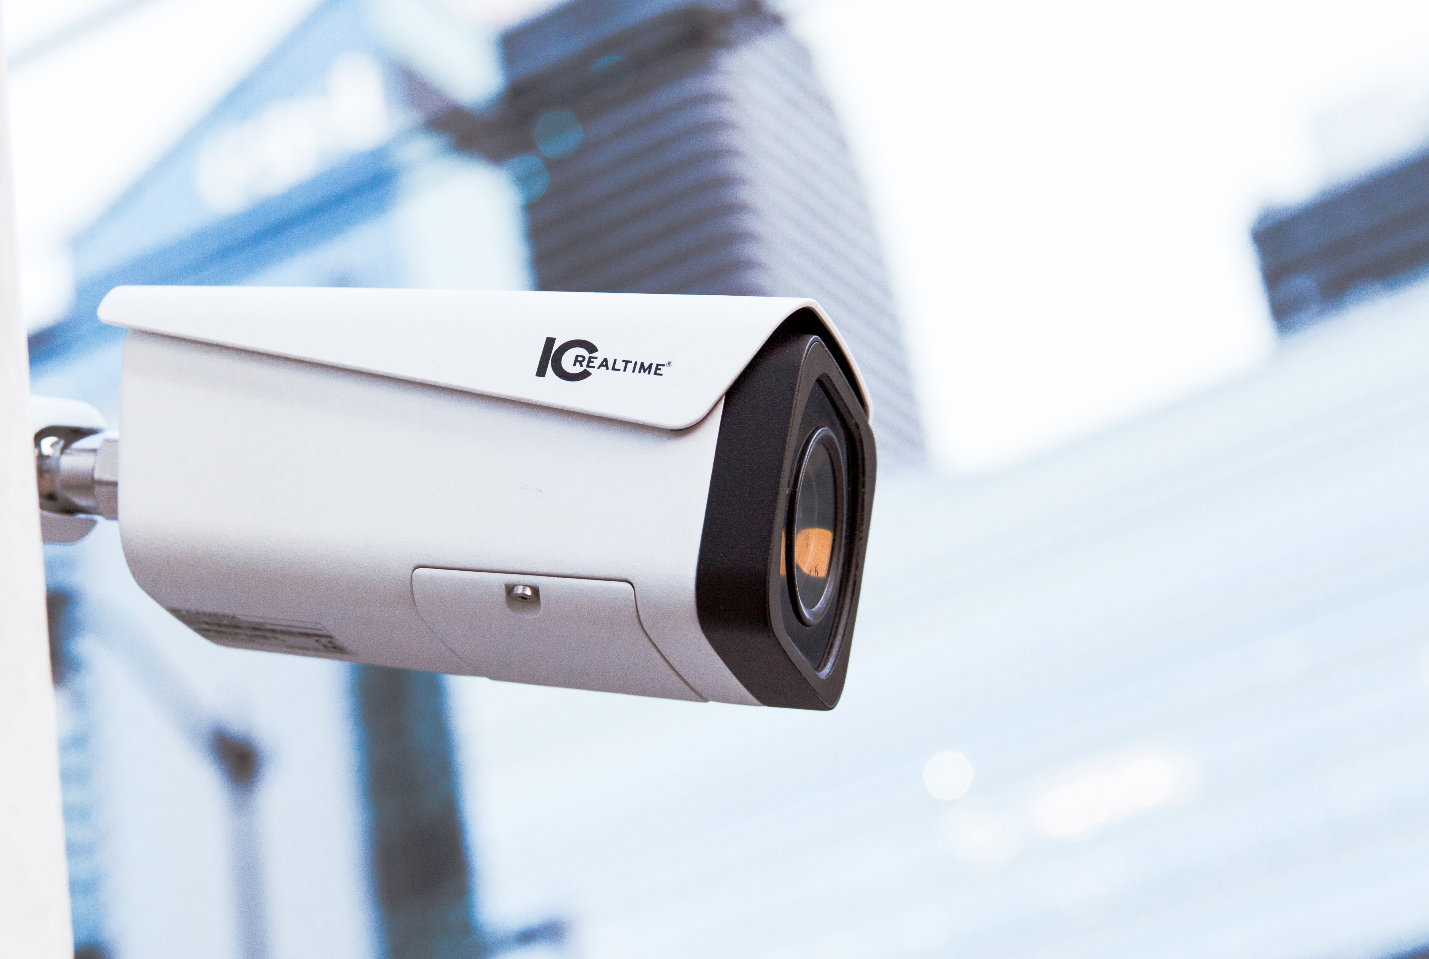 Is Your Business Protected? Enhance Security With Smart Surveillance.